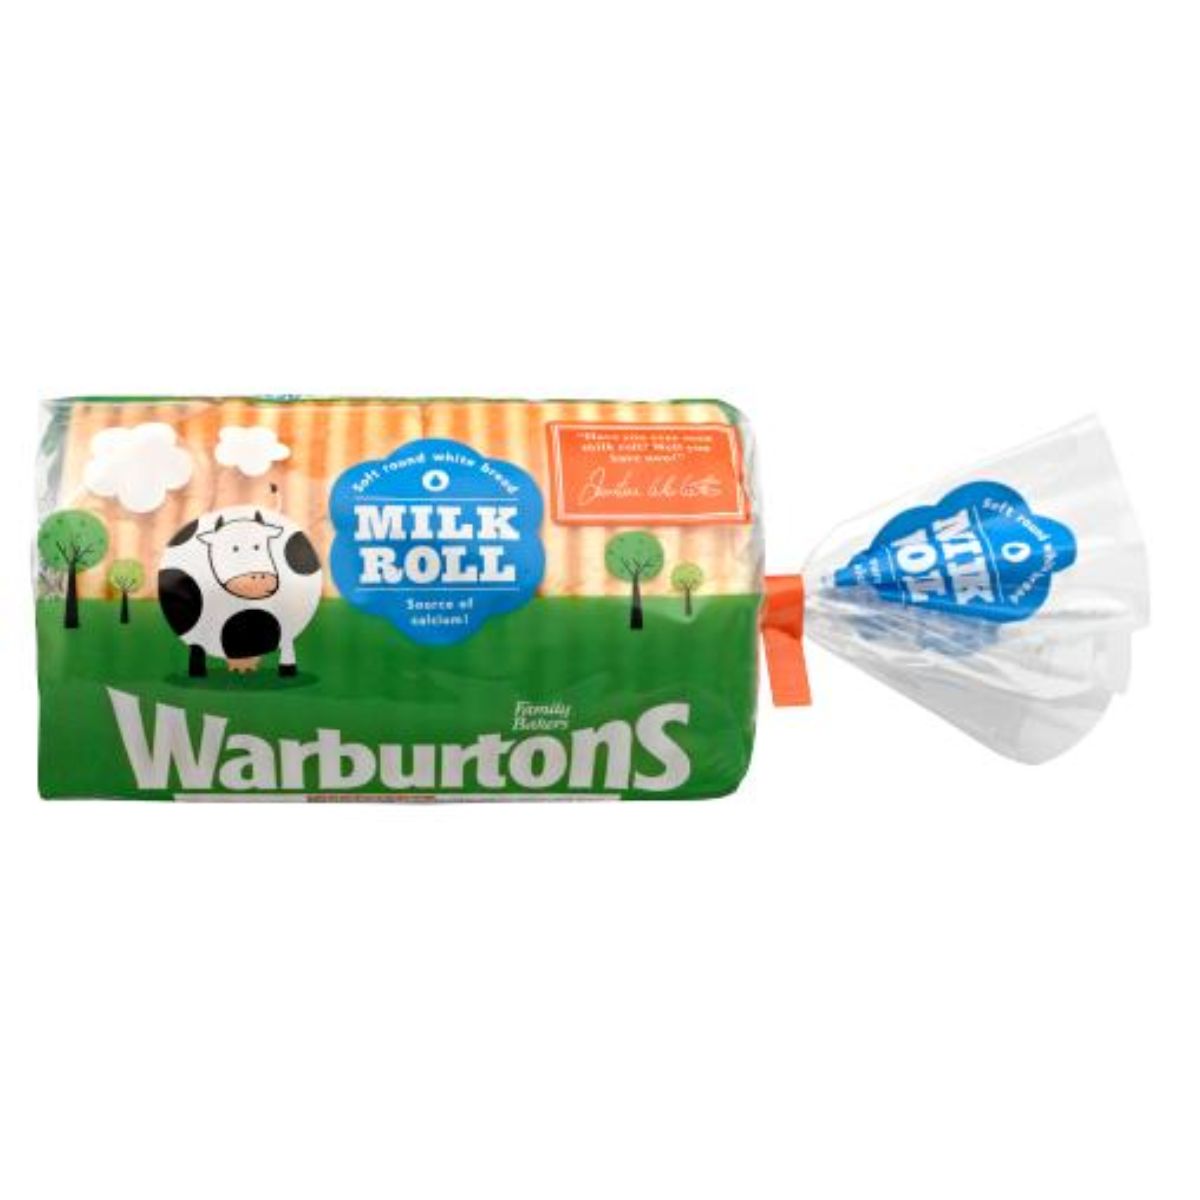 A bag of Warburtons - Soft Round White Bread Milk Roll - 400g on a white background.